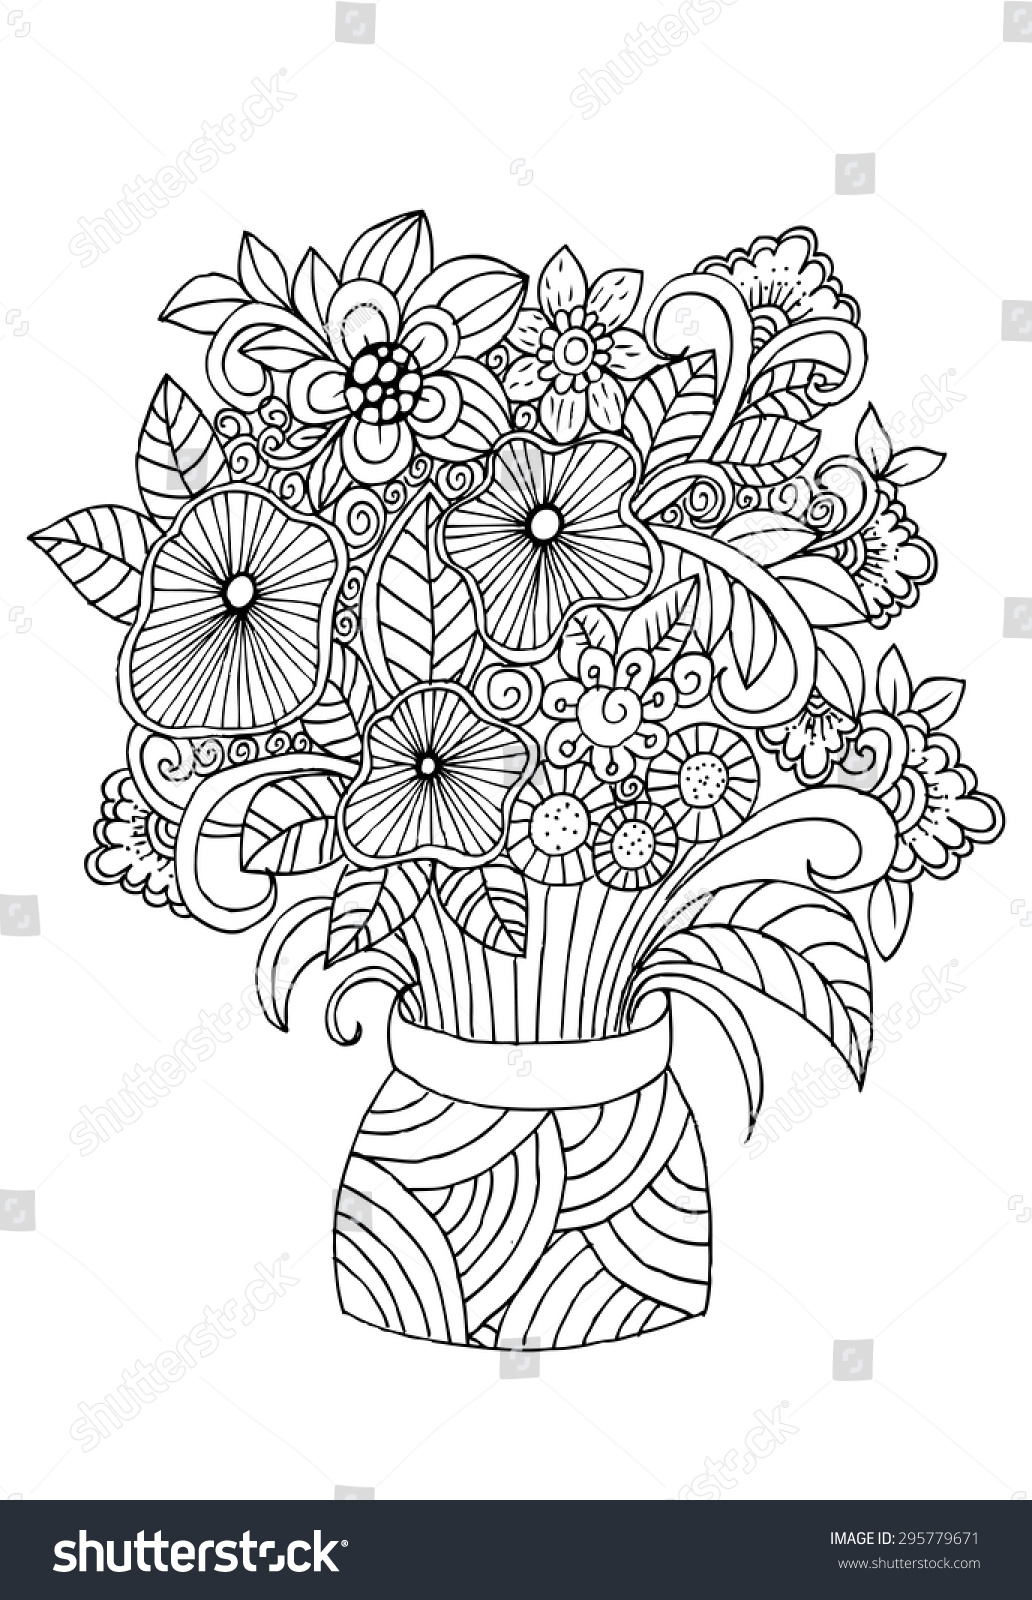 Flowers Vase Doodle Floral Pencil Drawing Stock Vector Royalty Free